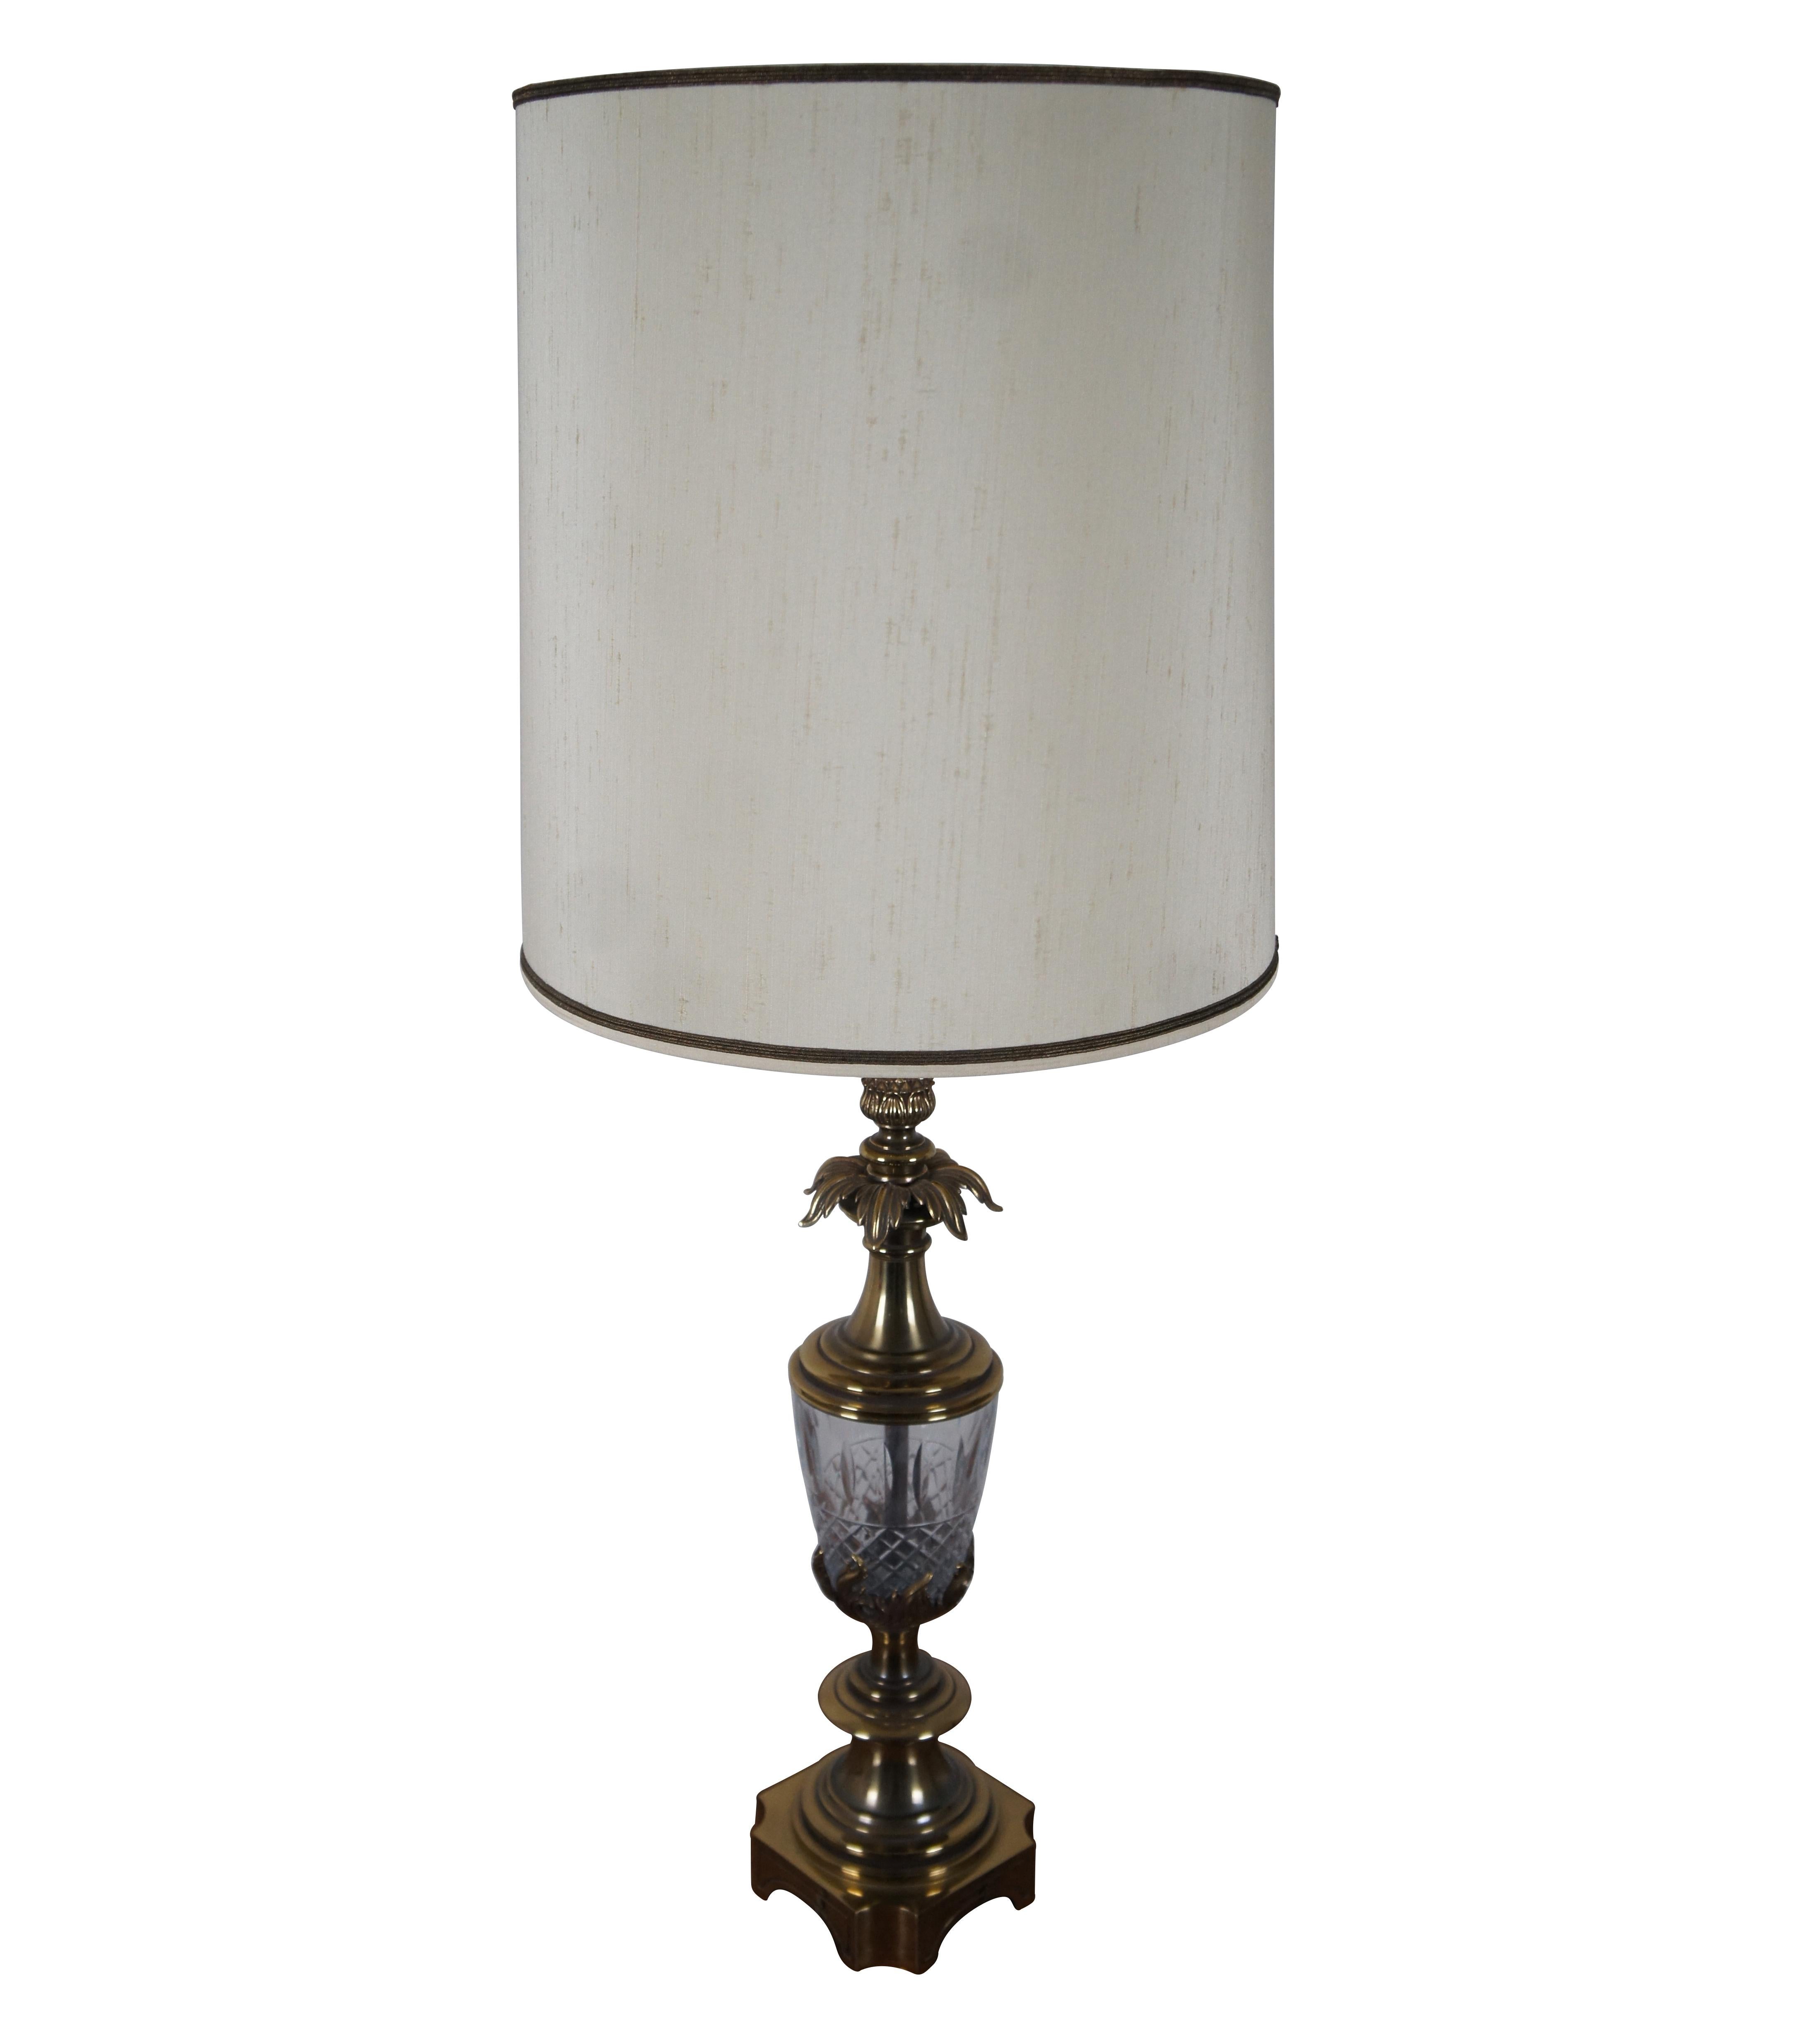 Vintage midcentury Stiffel brass and cut glass pineapple, Hollywood Regency style table lamp. Includes off white linen shade with metallic bronze trim.

Measures: 6” x 6” x 29.5” / Shade - 16.5” x 18” / Total Height – 41.75” (Width x Depth x